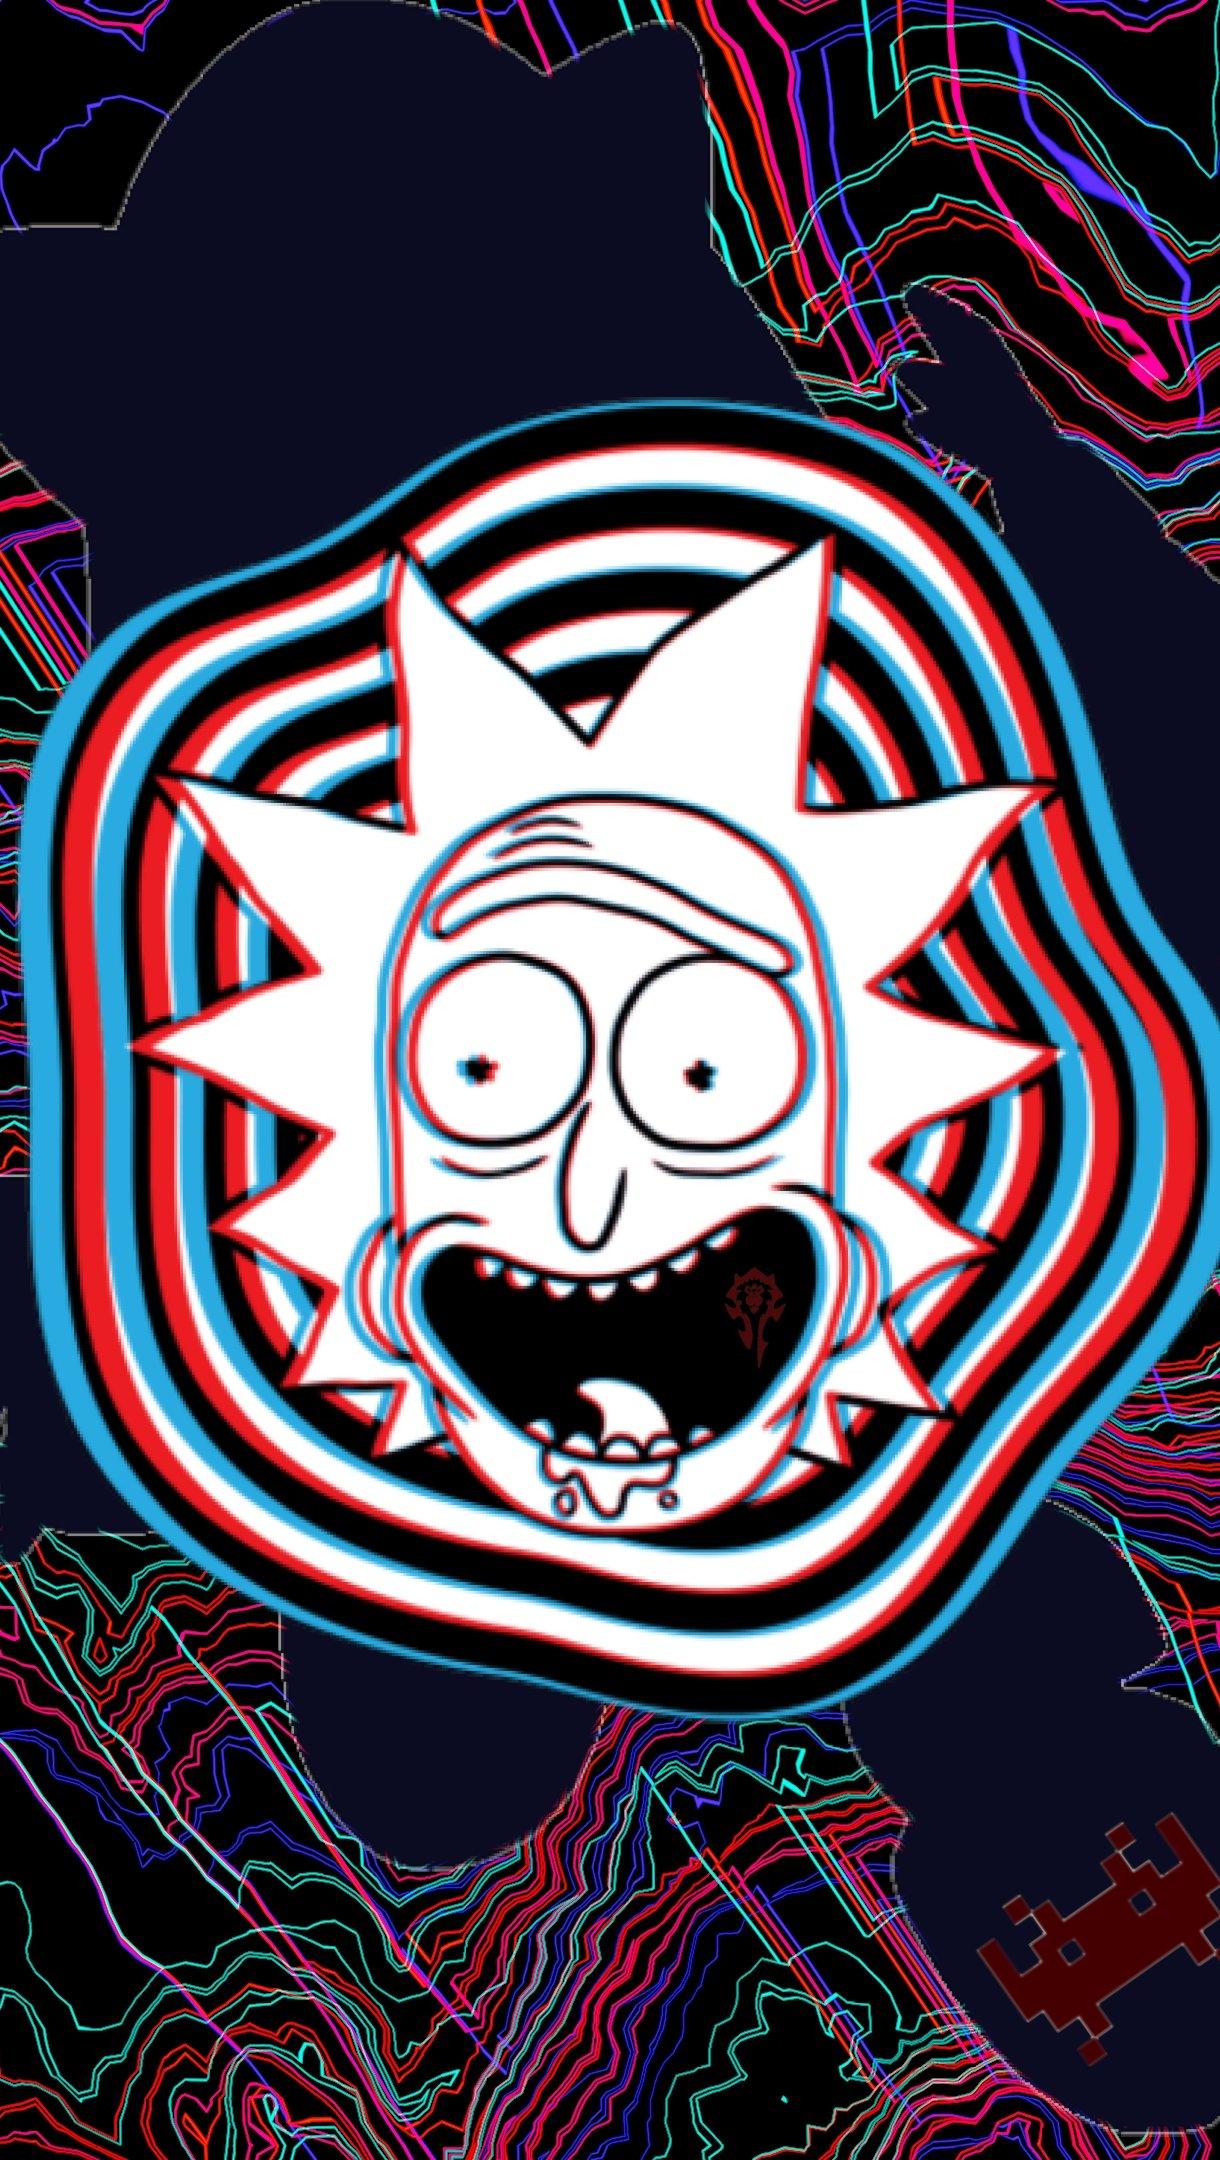 Best Rick and Morty Wallpapers on WallpaperDog